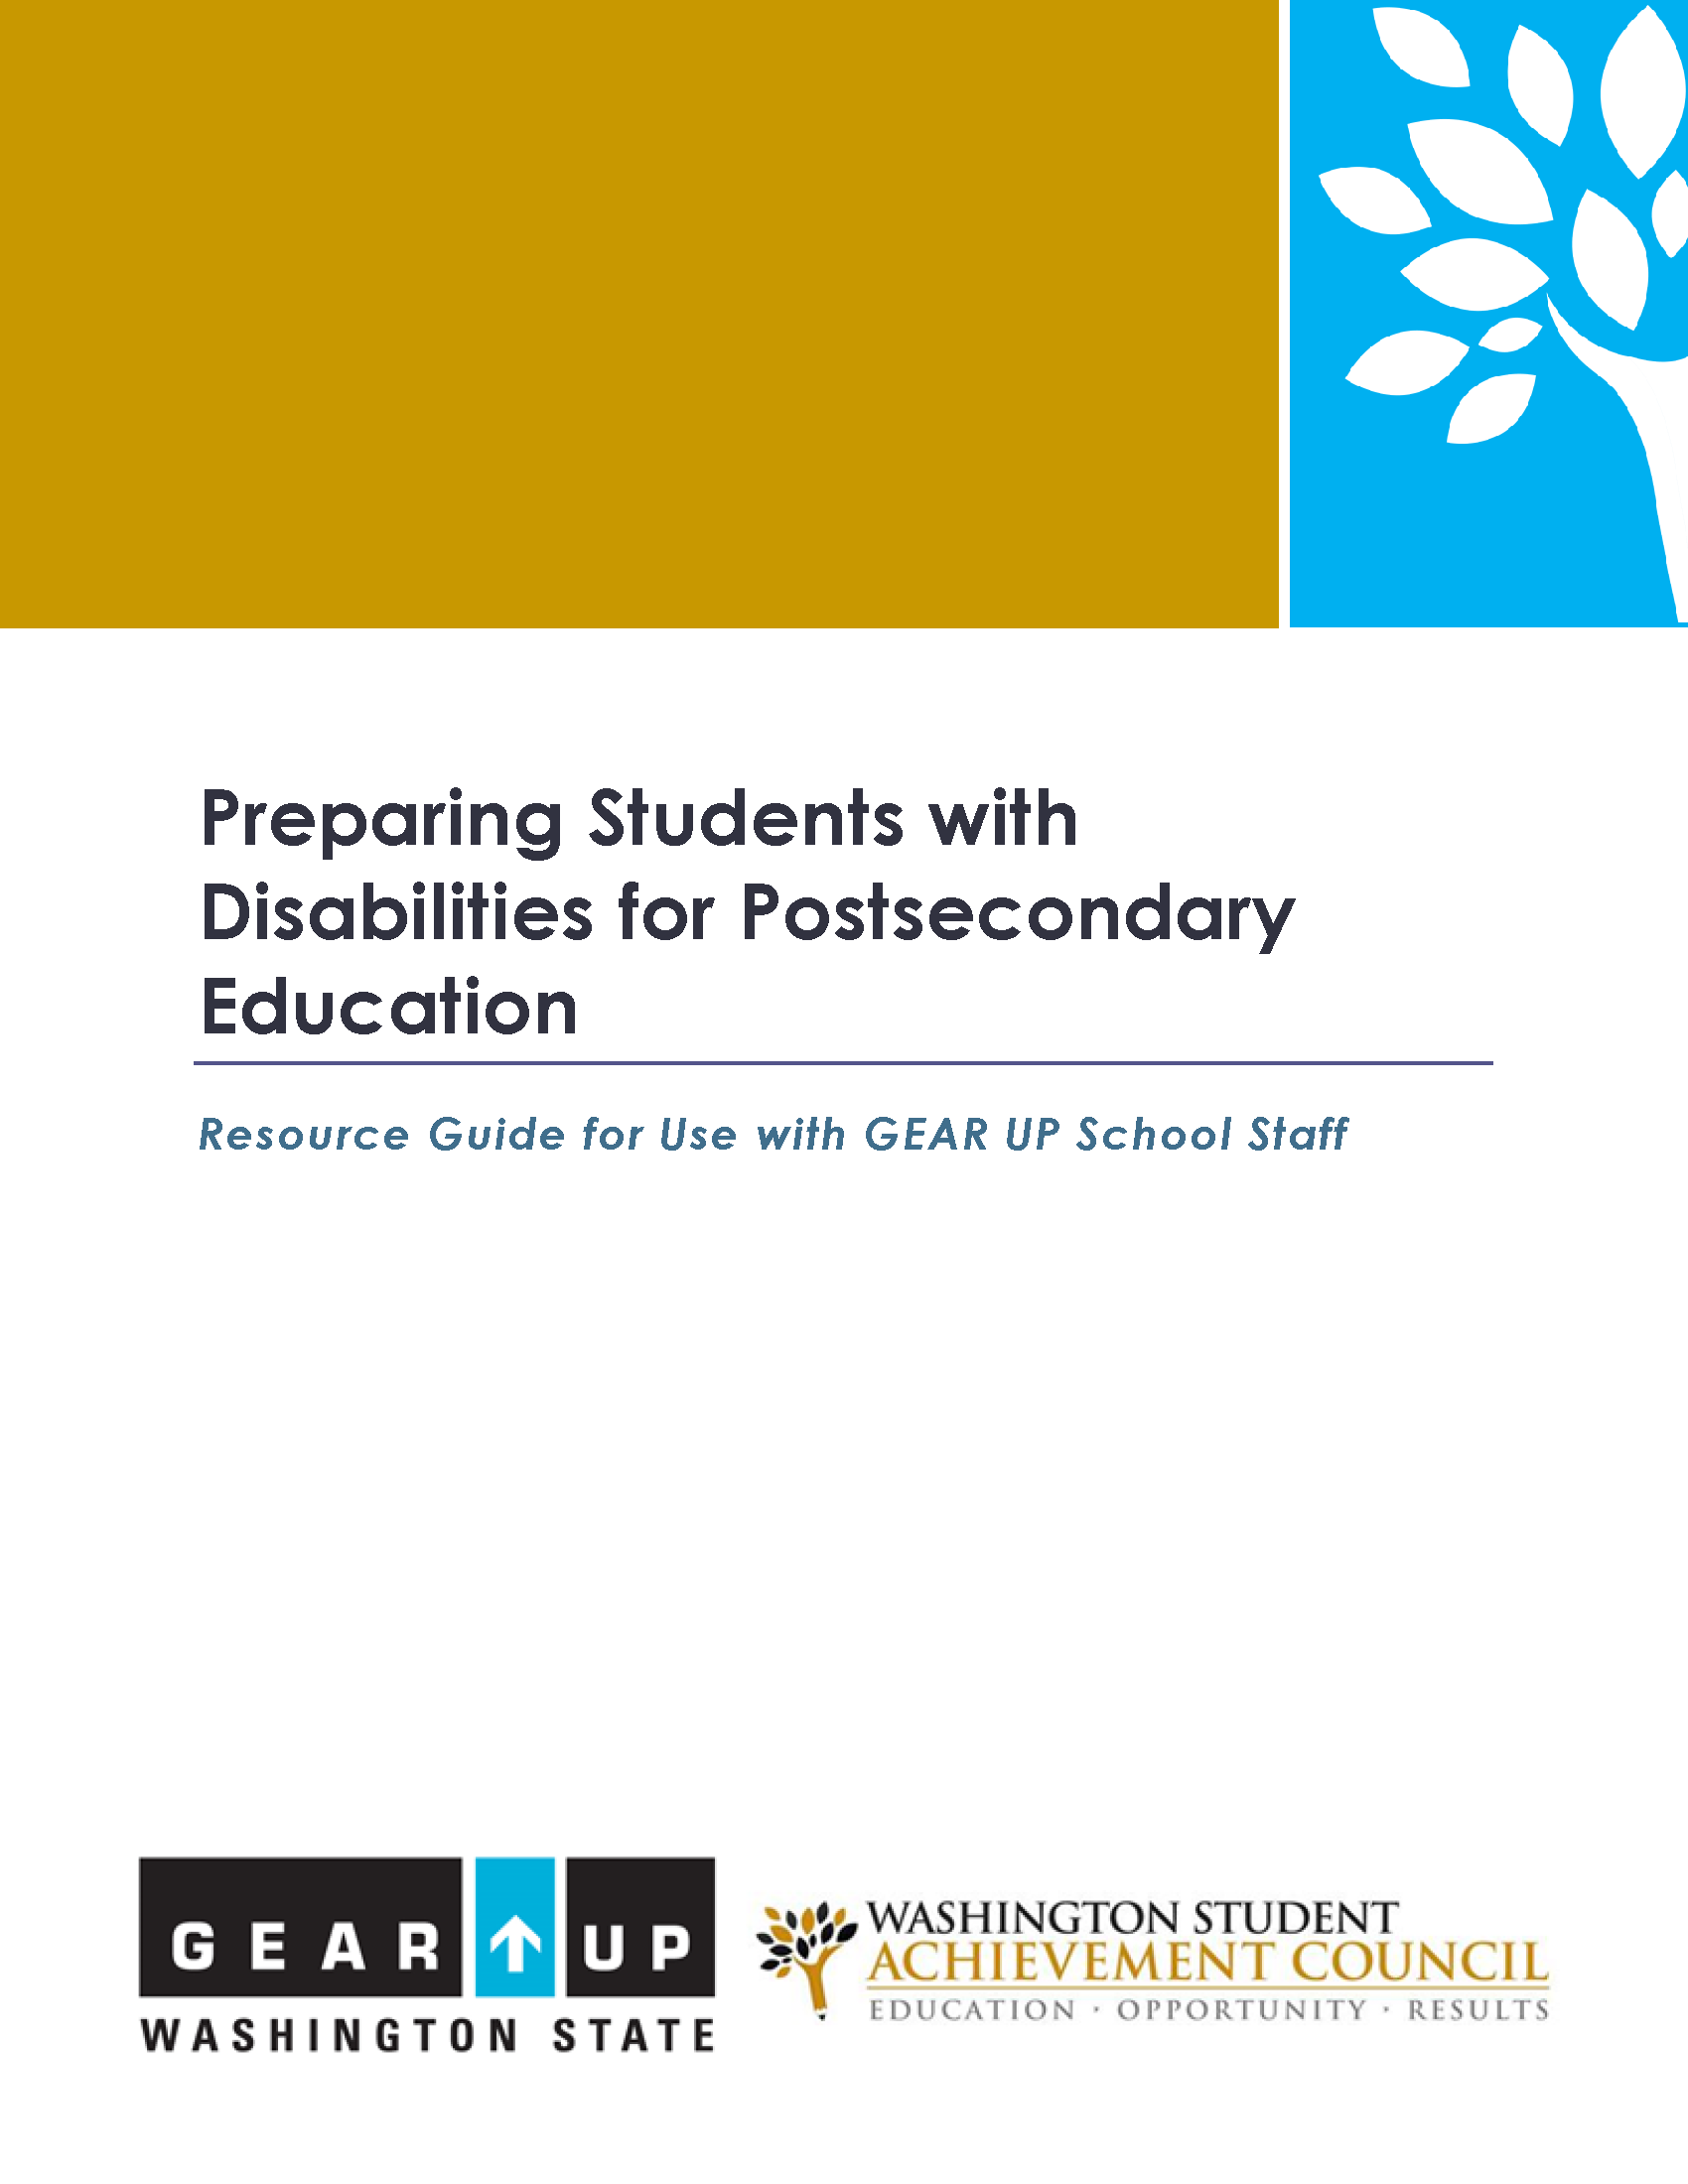 Image: Title page of Preparing Students with Disabilities for Postsecondary Education